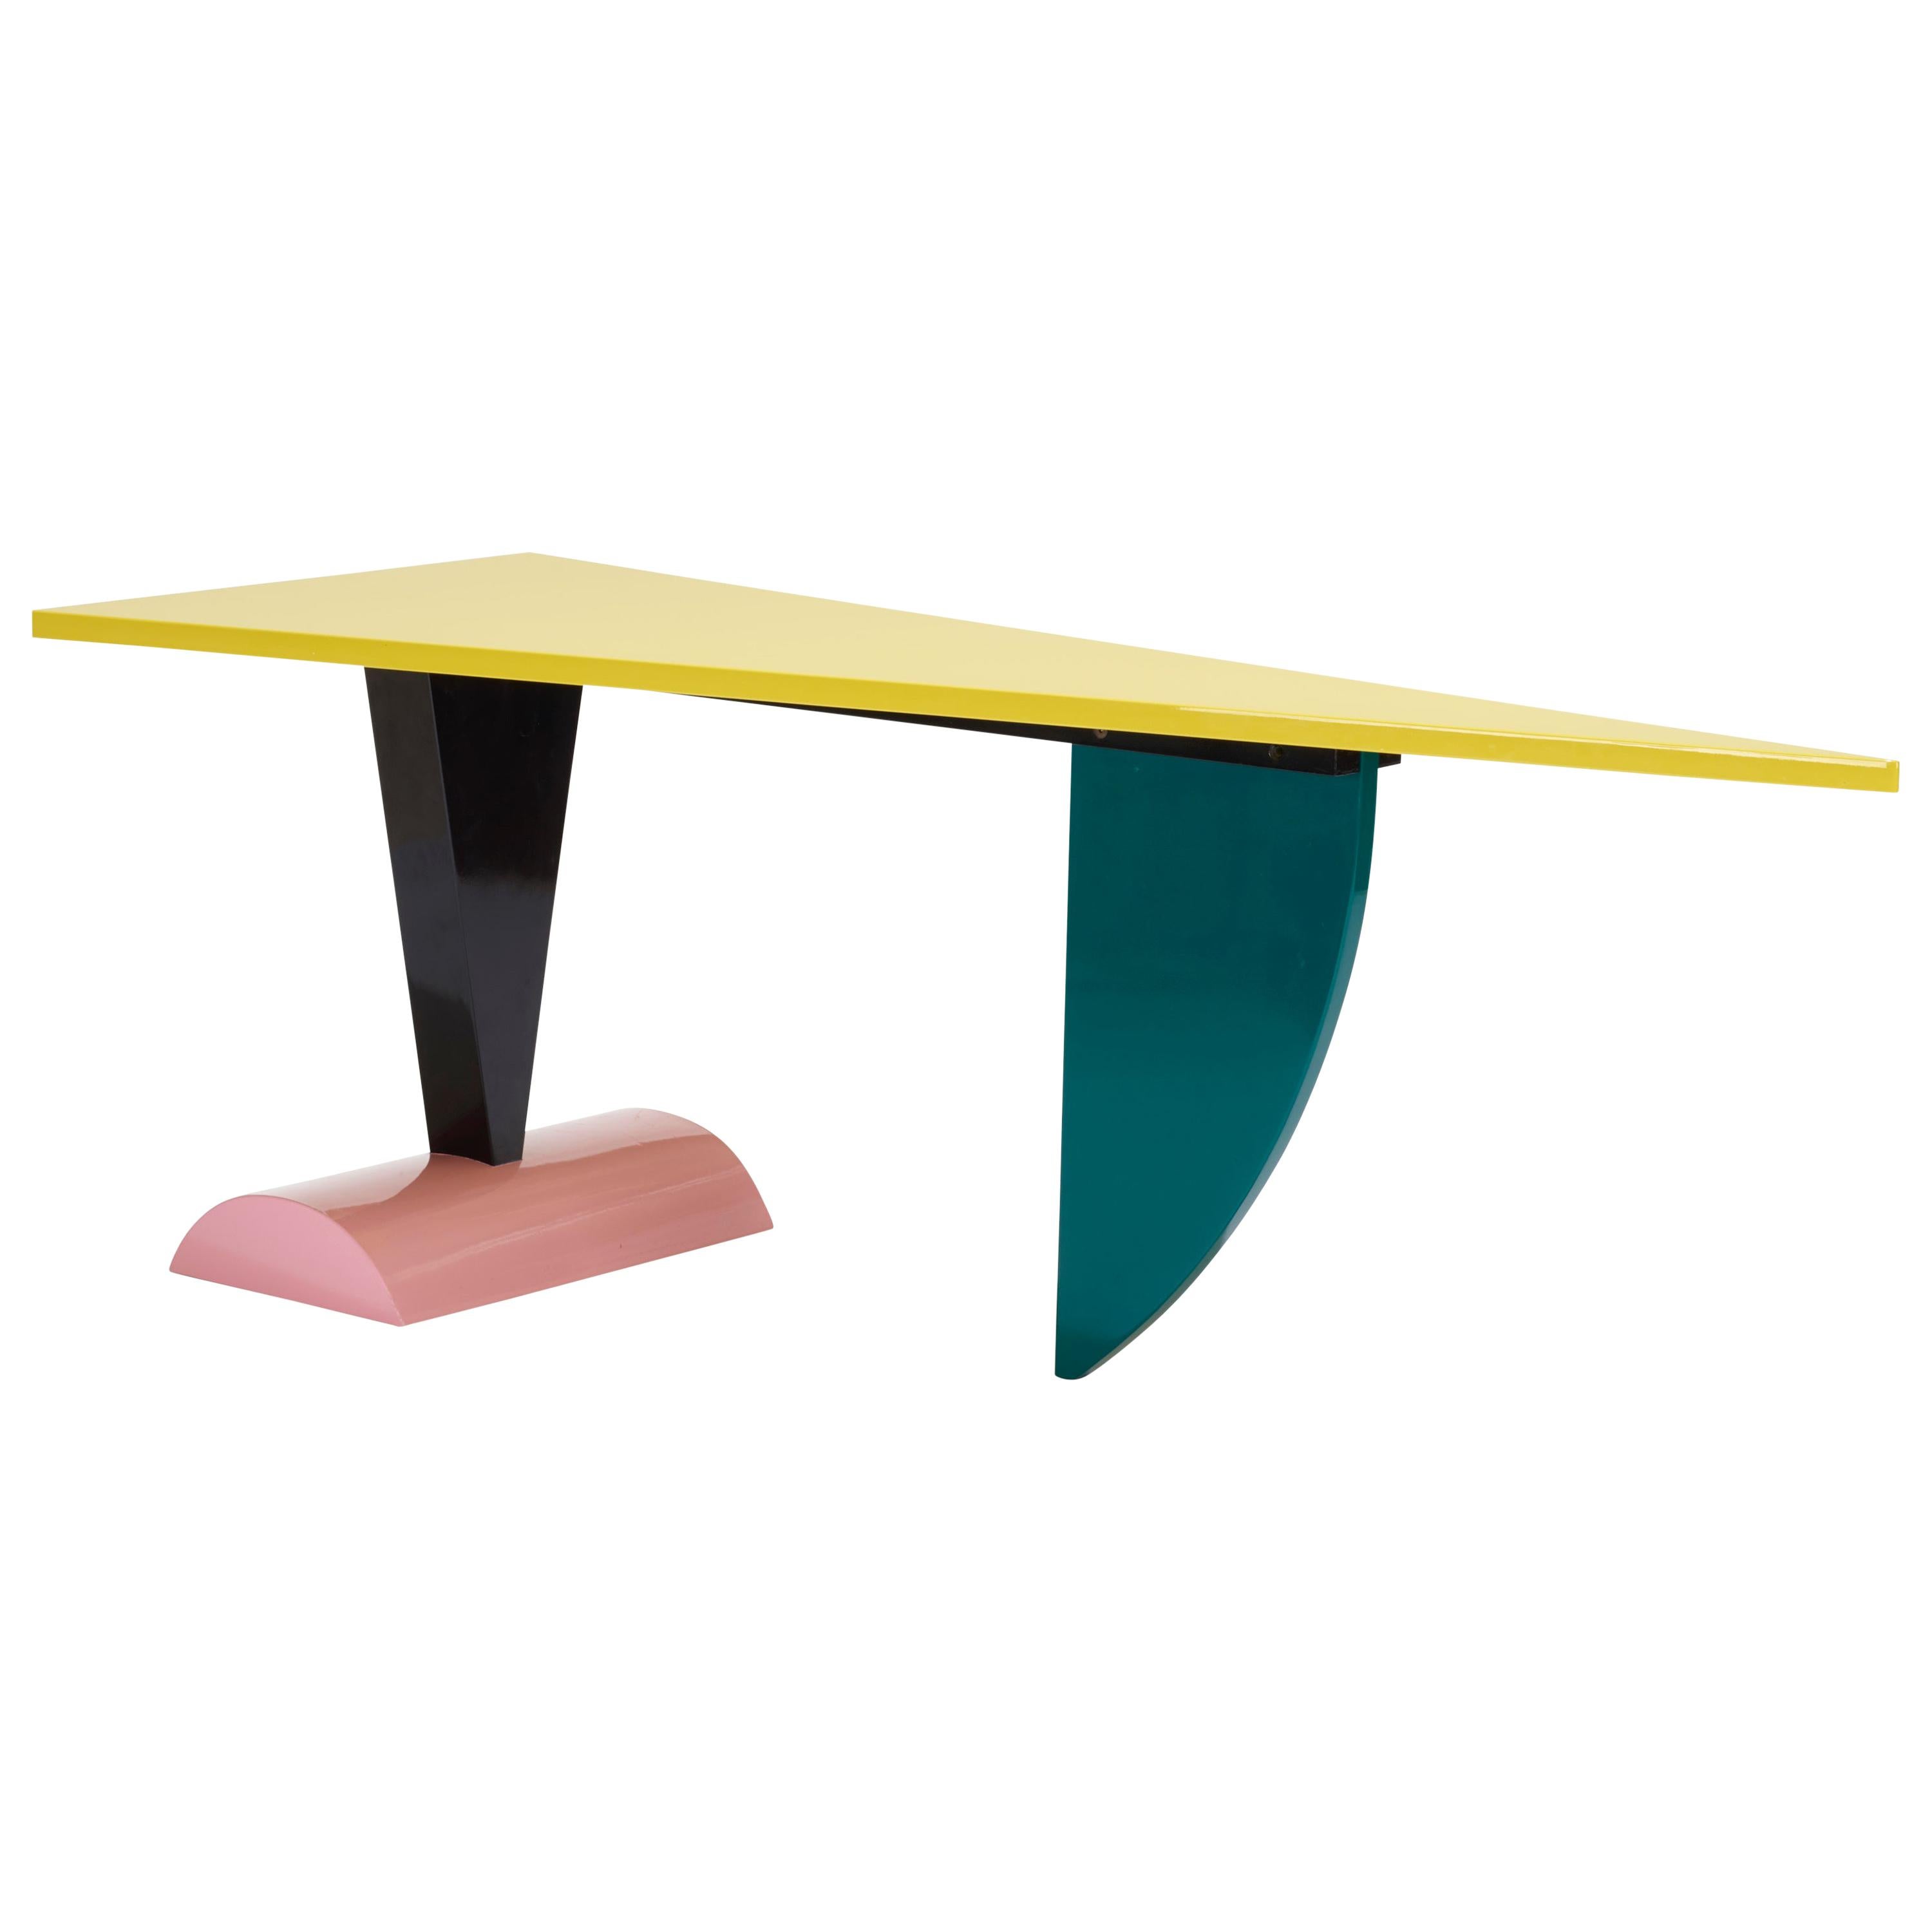 Peter Shire: Original Memphis Milano Brazil Table in Lacquered Wood, Italy 1981 For Sale